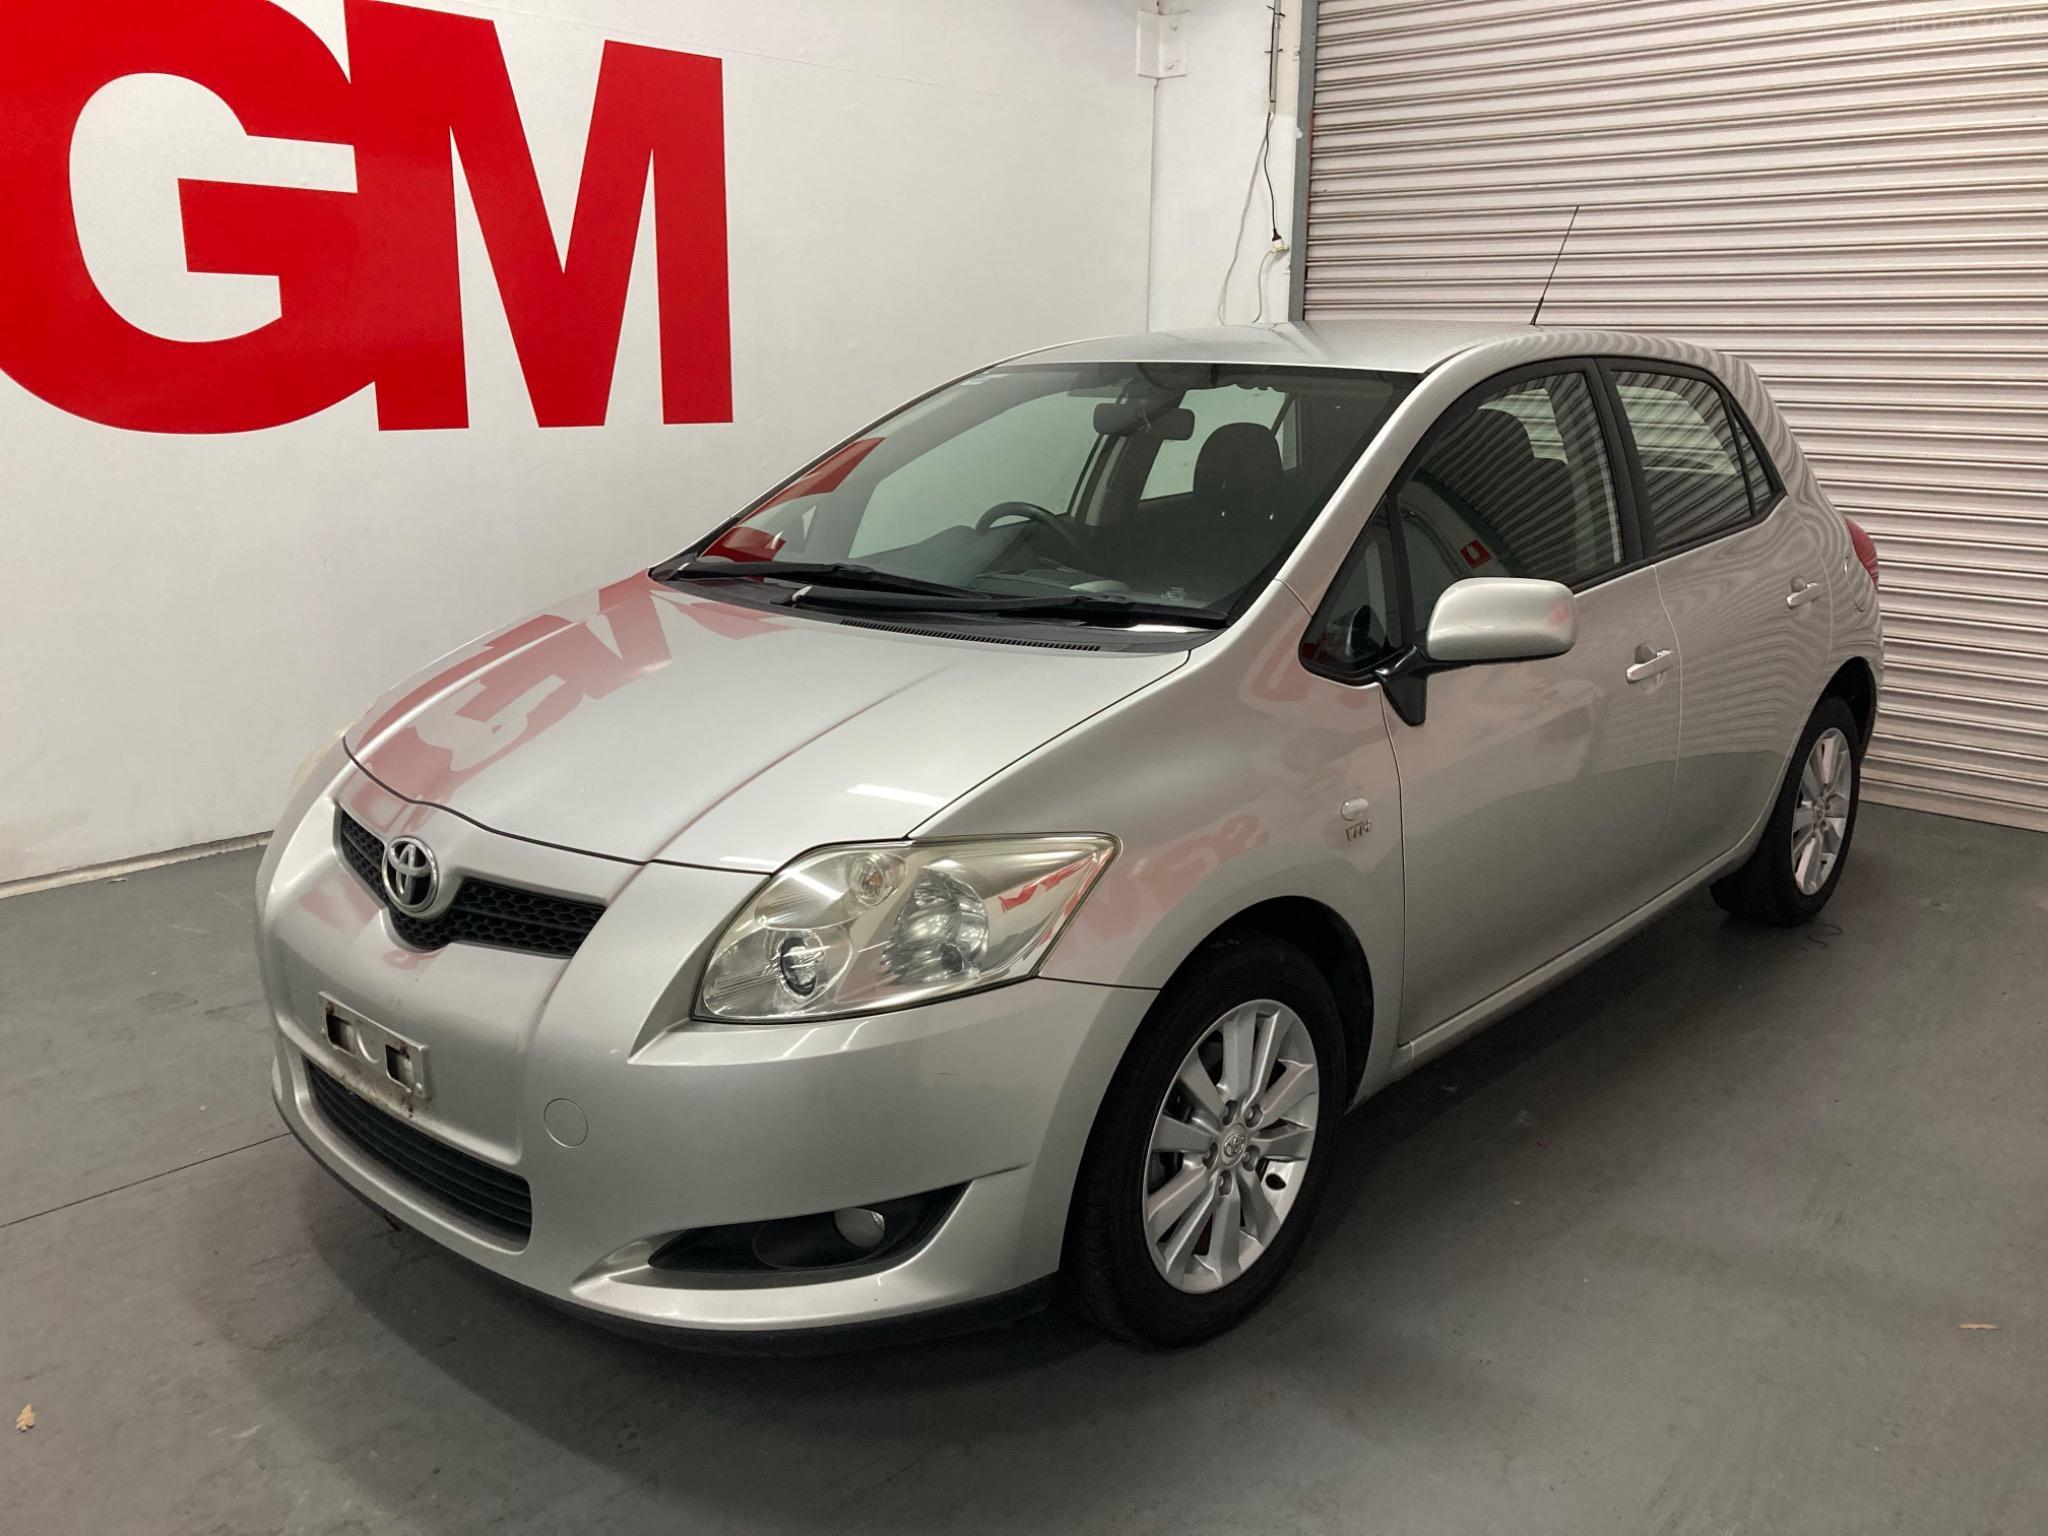 2007 Toyota Corolla ZRE152R Conquest Hatchback 5dr Man 6sp 1.8i Picture 8